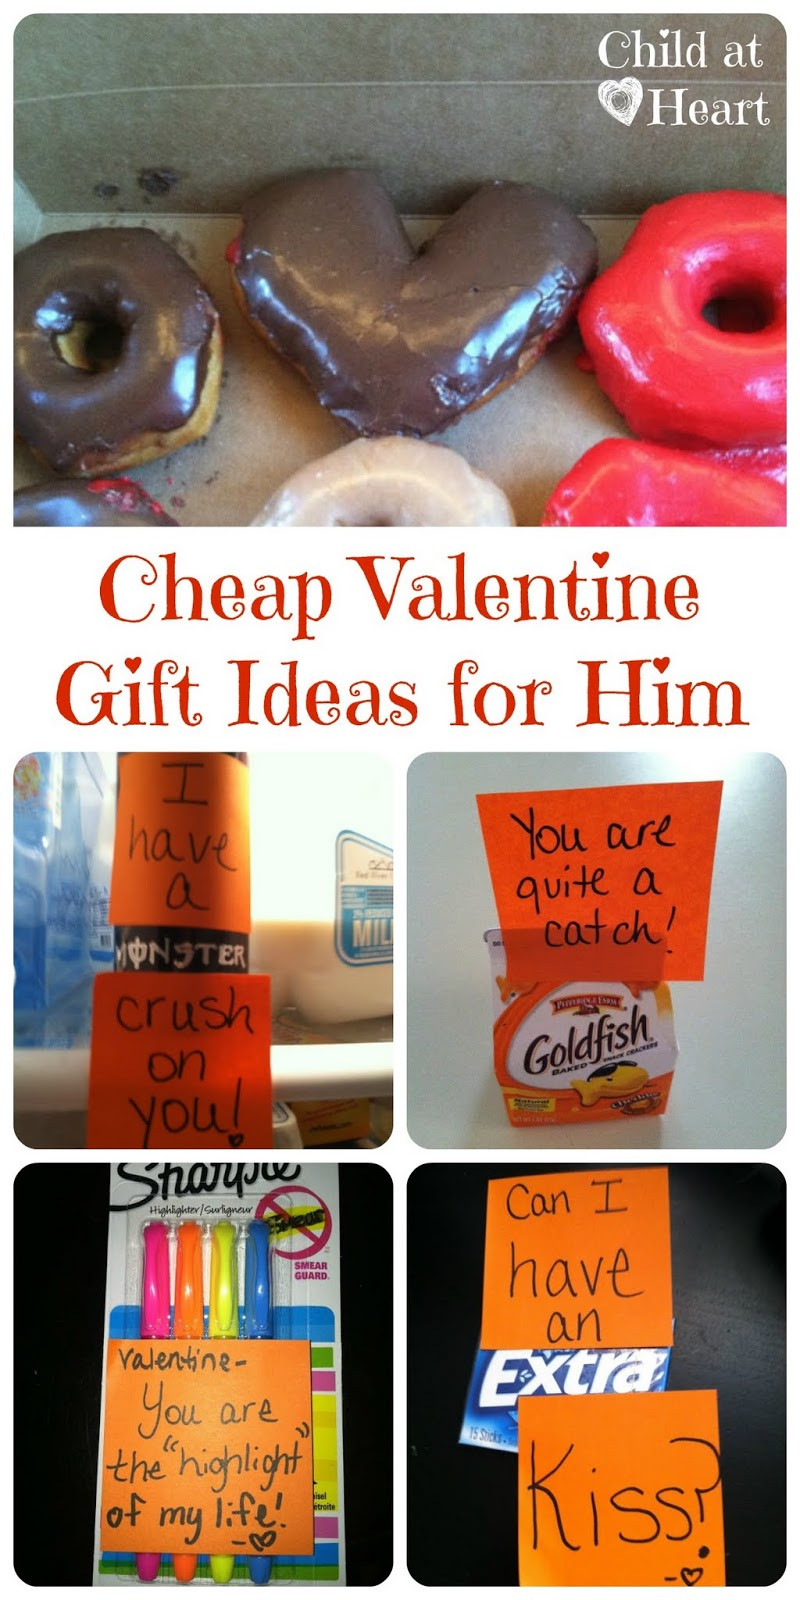 Funny Valentines Day Gifts For Him
 Cheap Valentine Gift Ideas for Him Child at Heart Blog